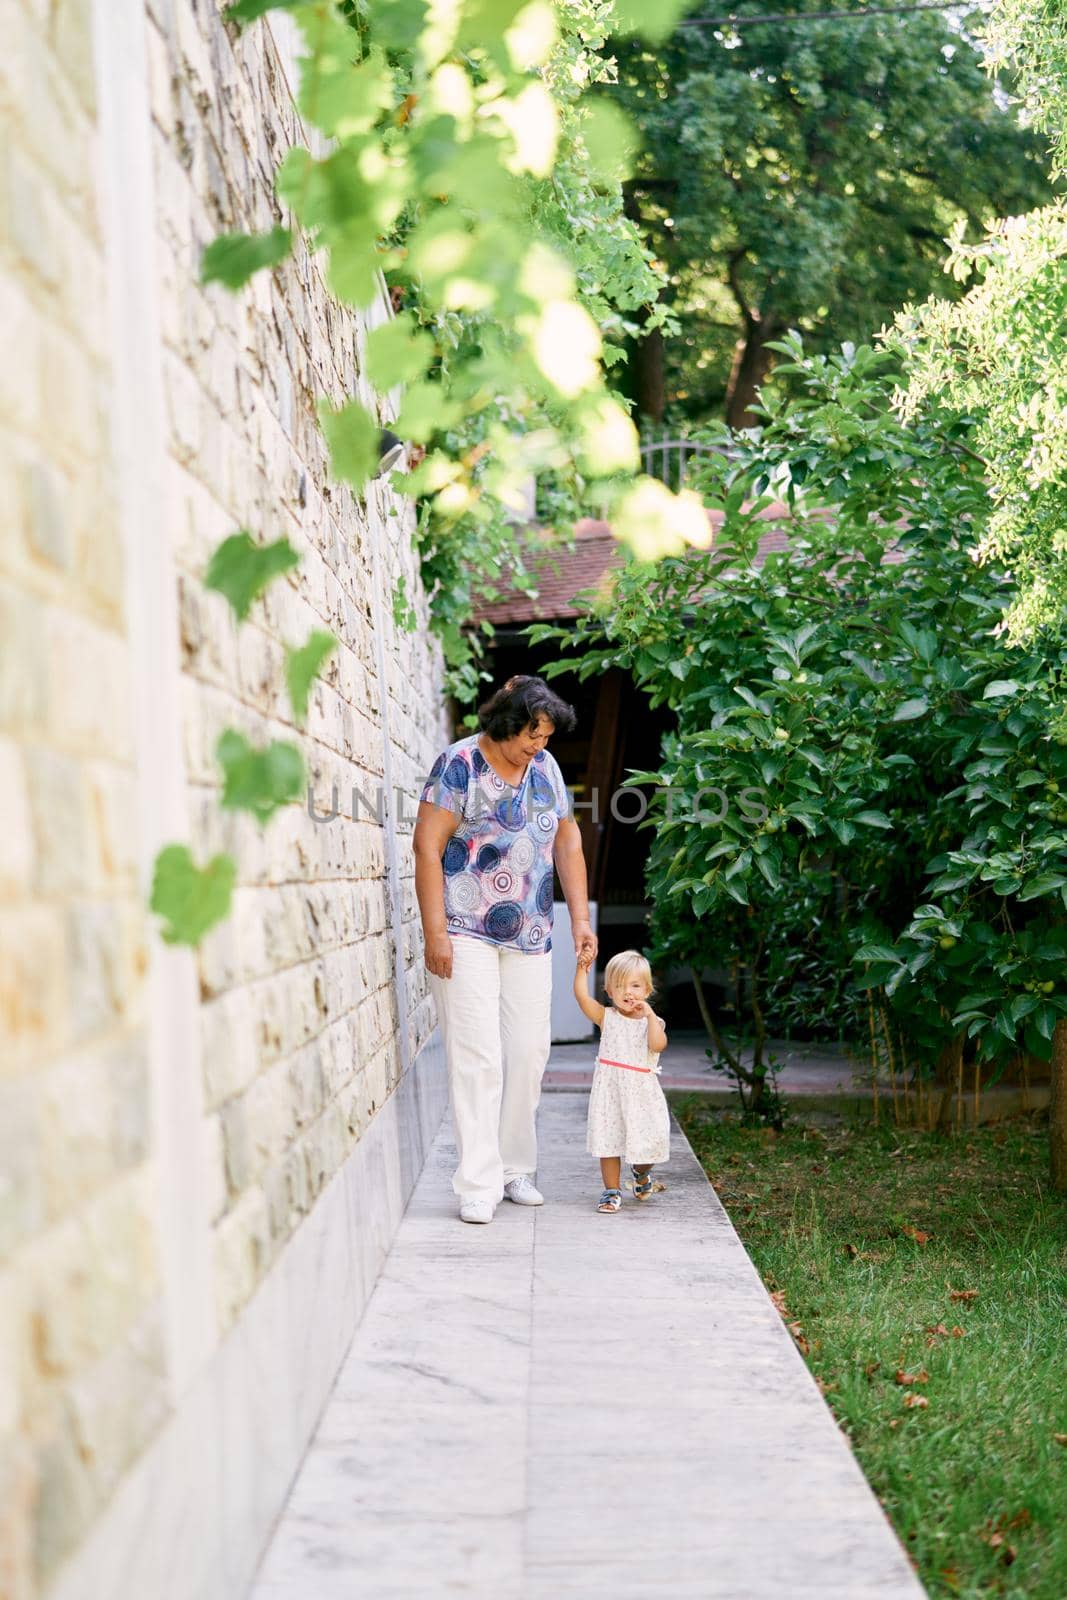 Grandmother with her little granddaughter walk holding hands against a stone wall in the garden by Nadtochiy